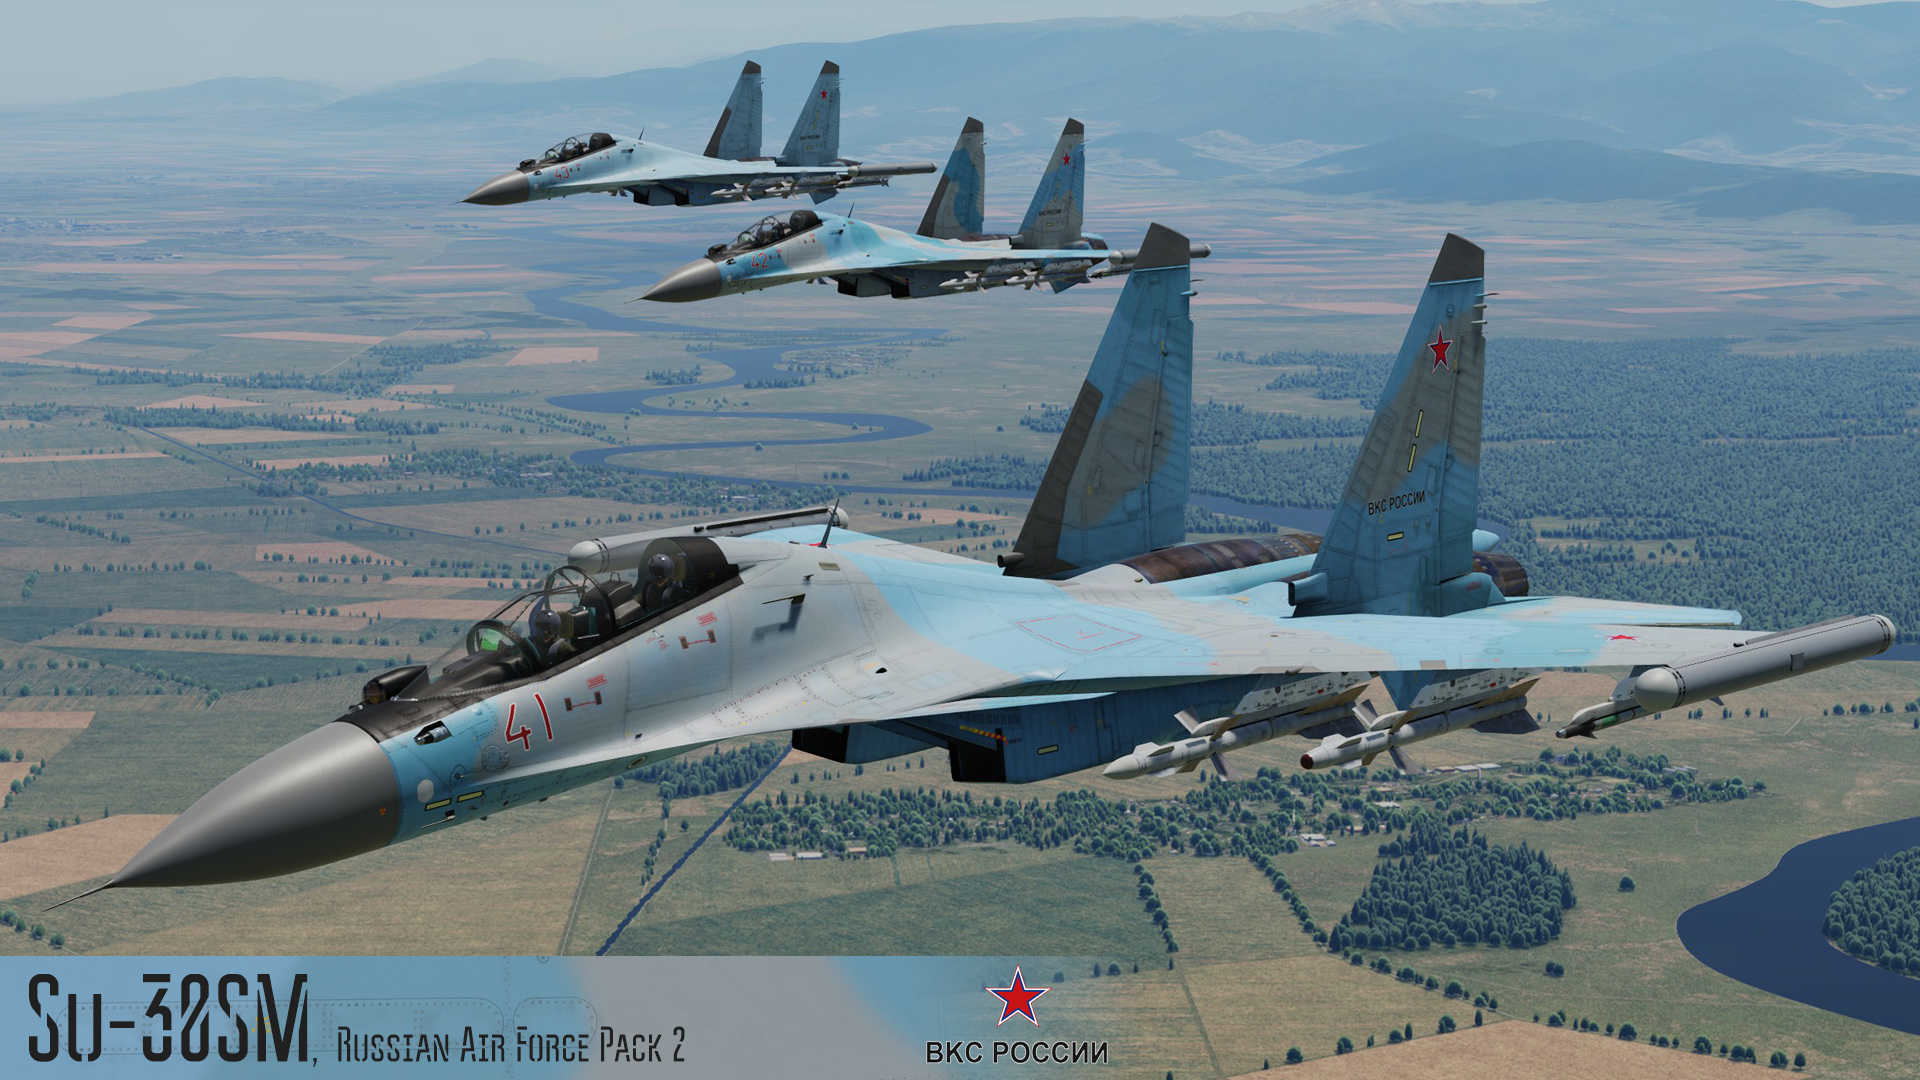 Russian Air Force Pack 2